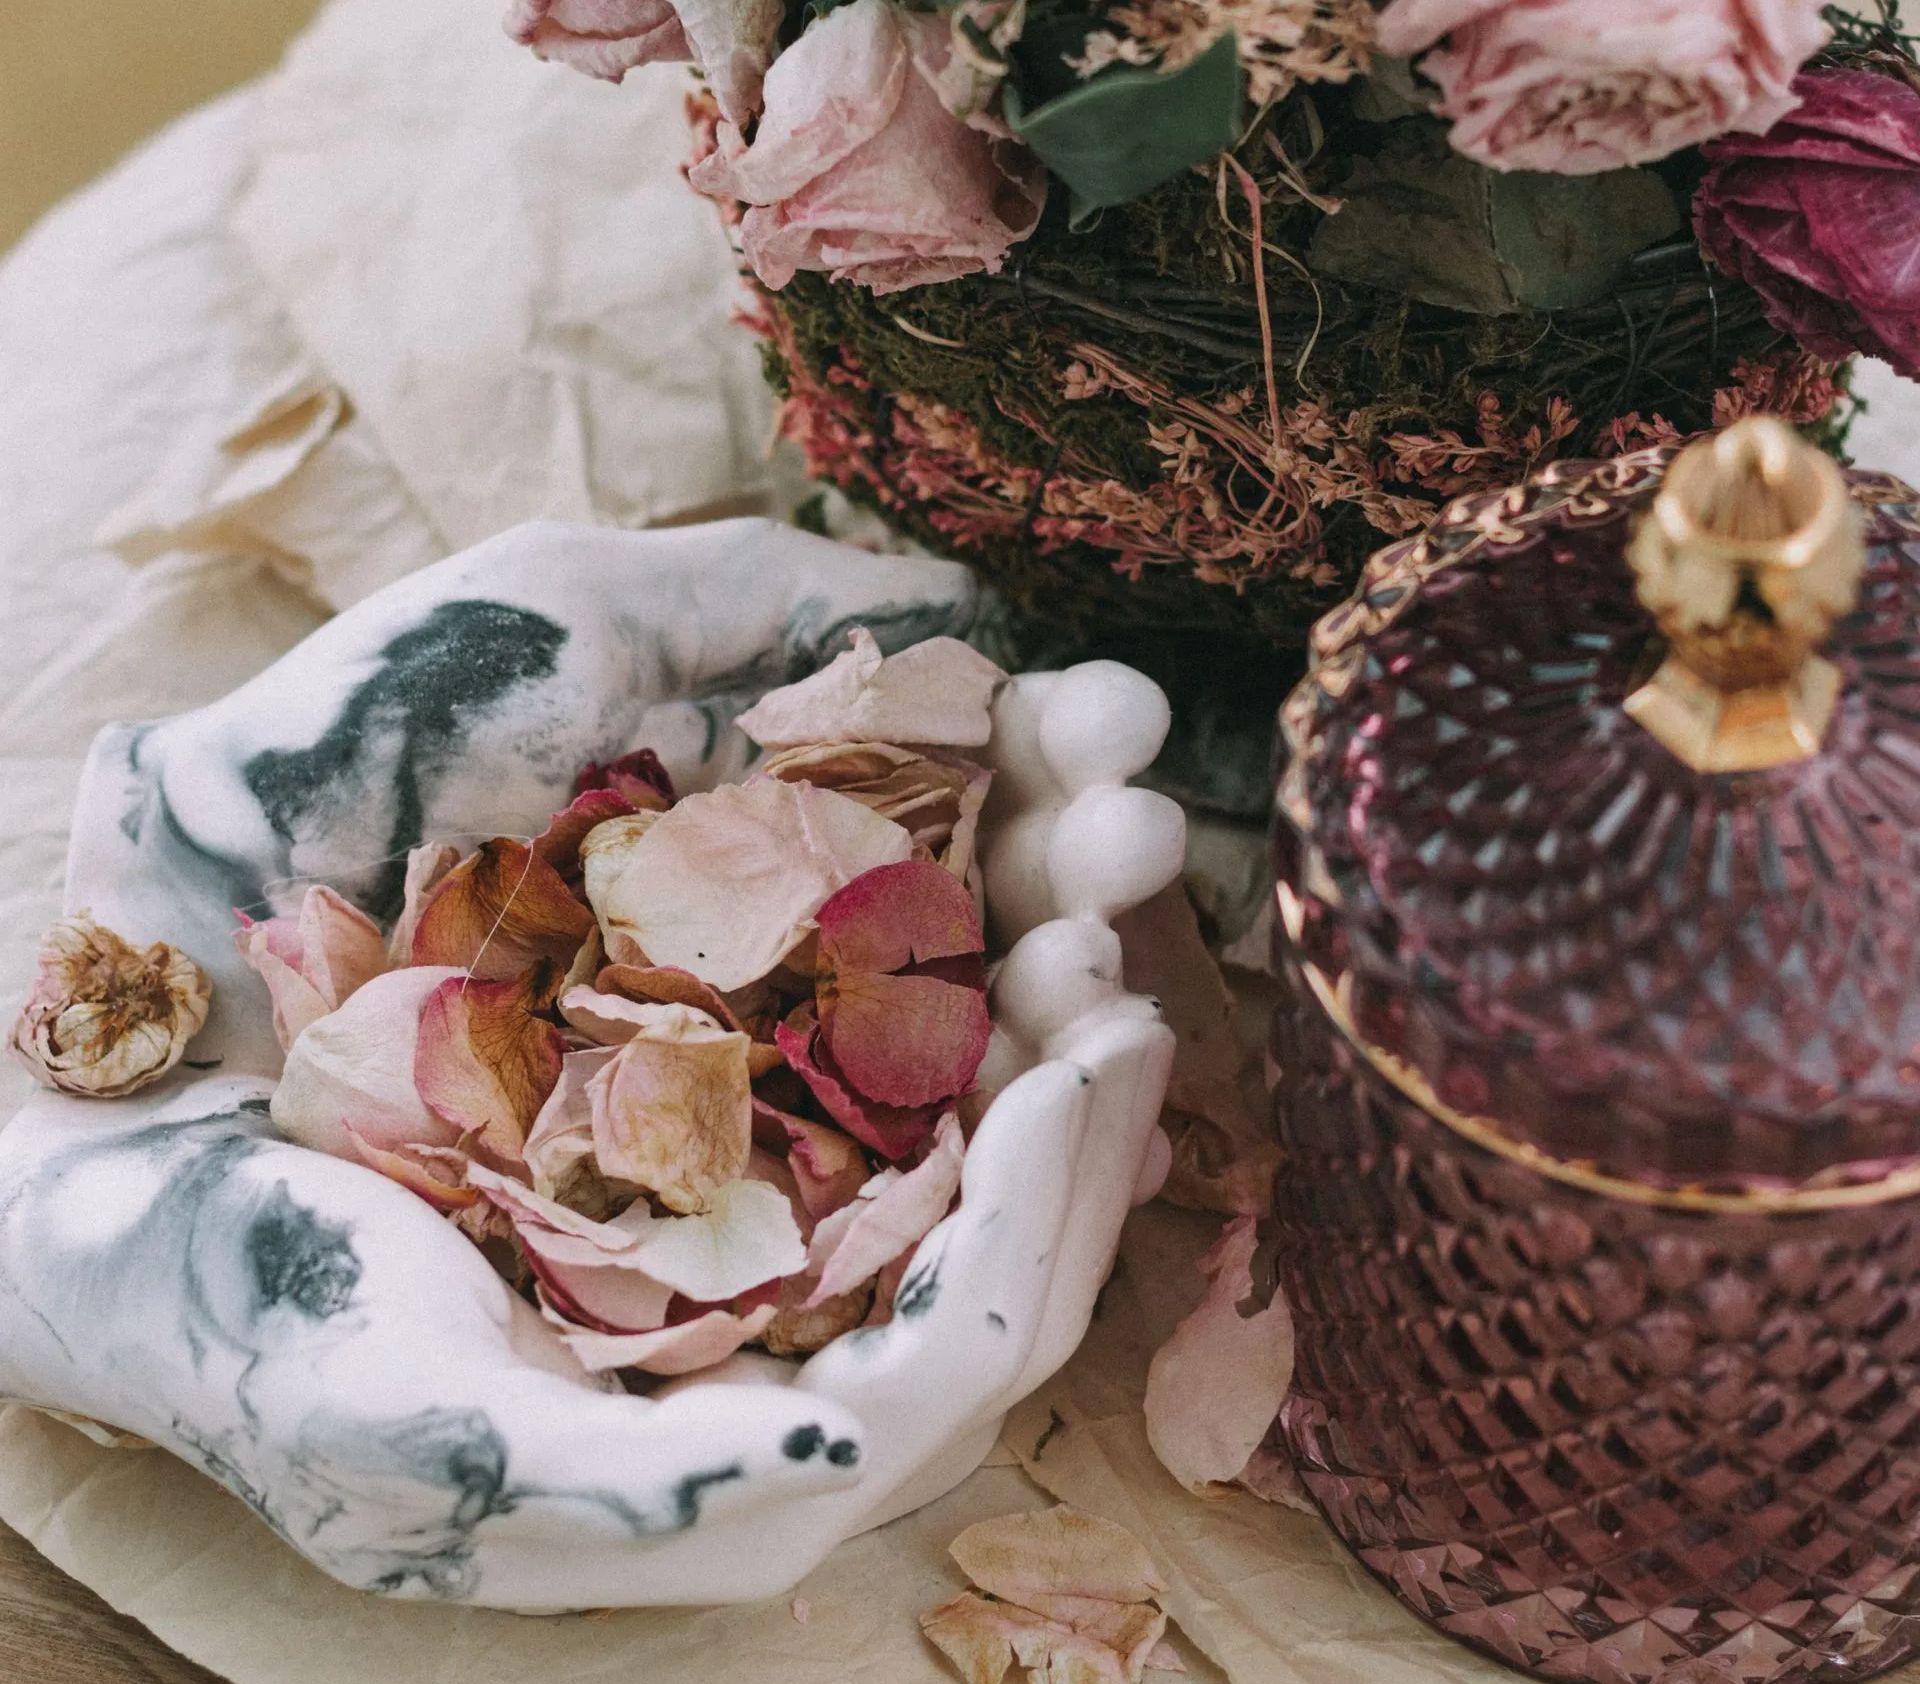 A deep purple textured glass canister sits on a table surrounded by a hands-shaped bowl filled with a fragrant potpourri of flower petals, and a dried floral bouquet.